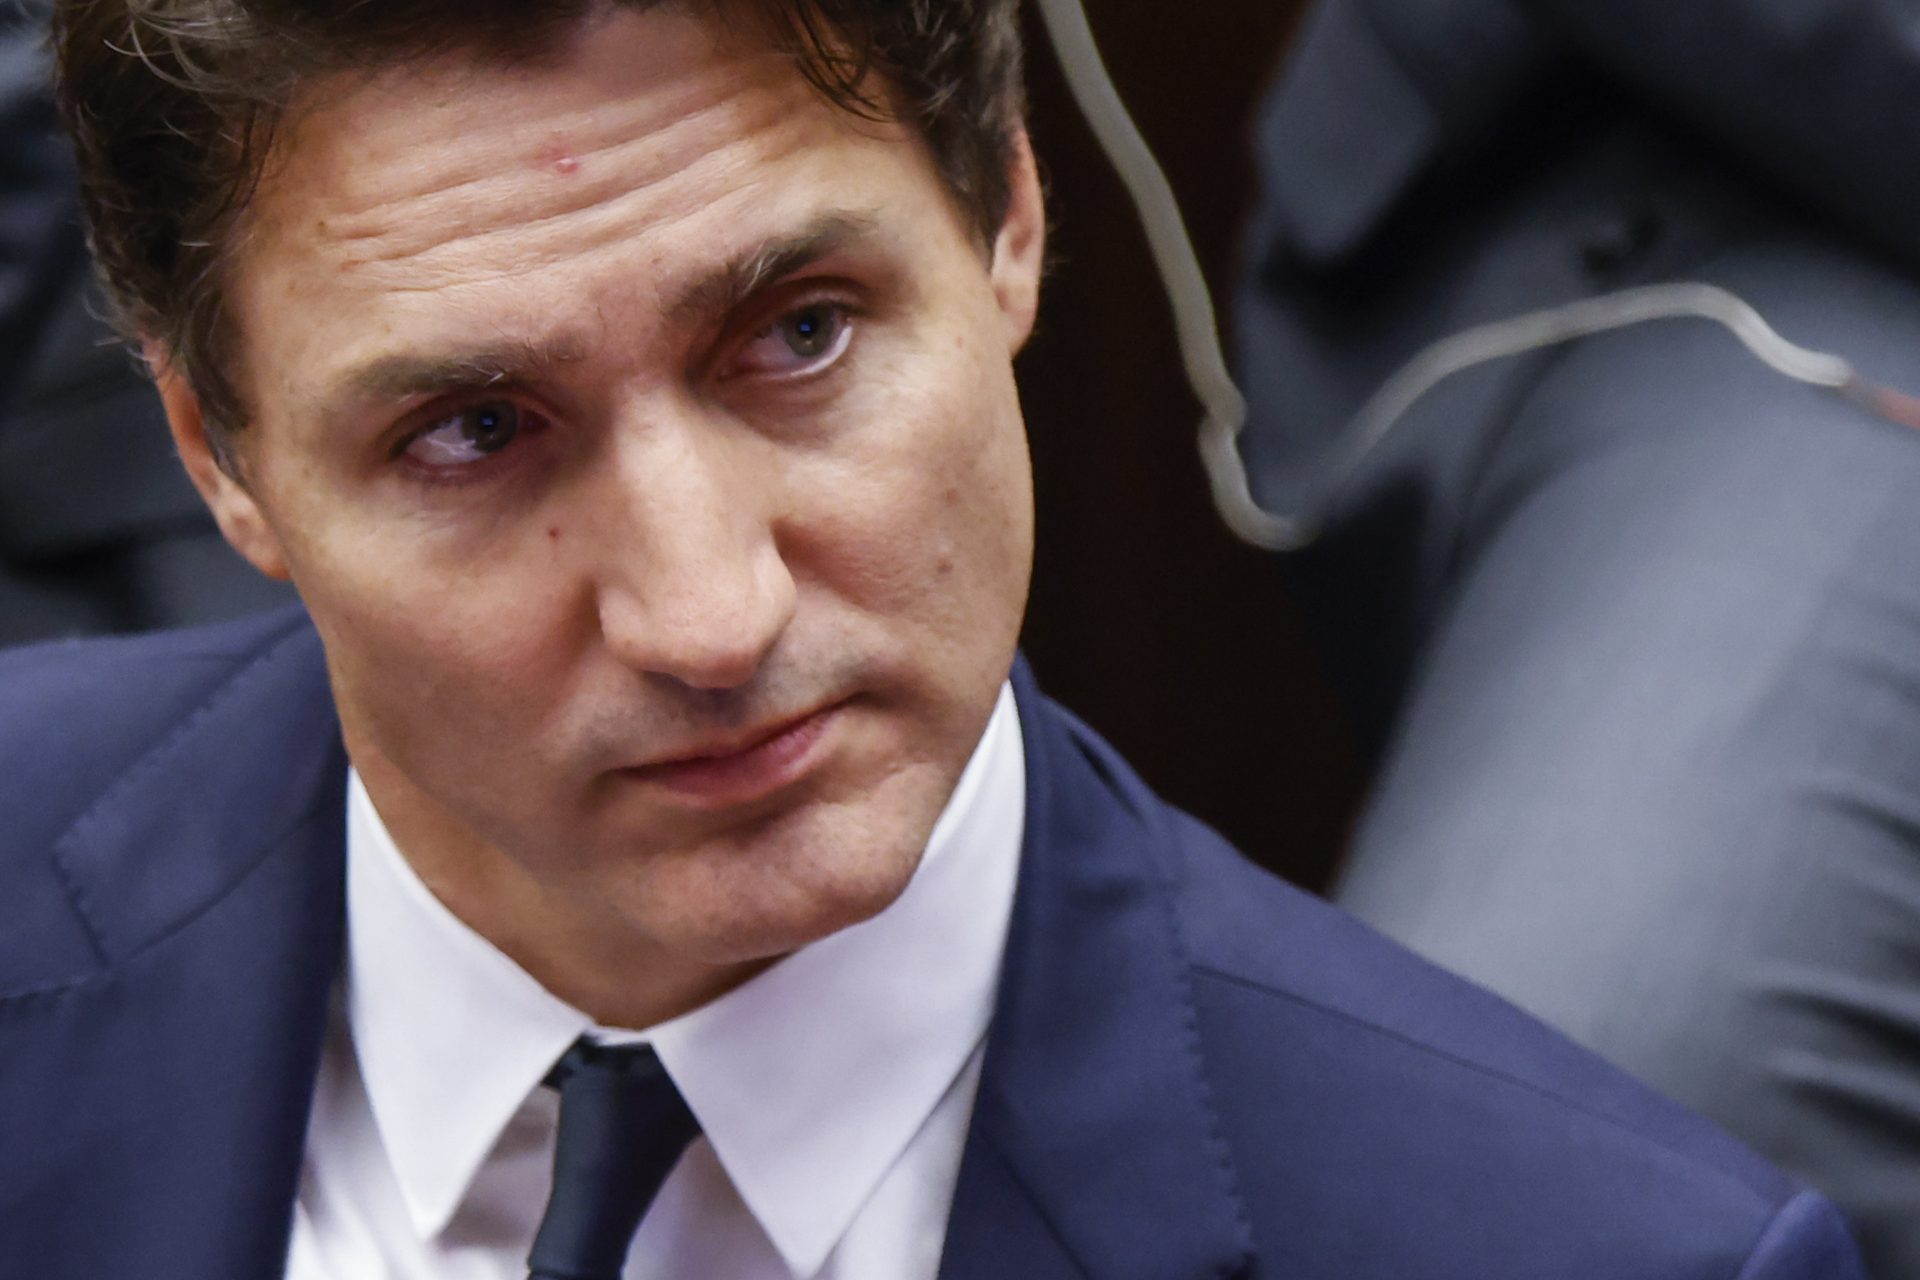 Most Canadians want Justin Trudeau to step down